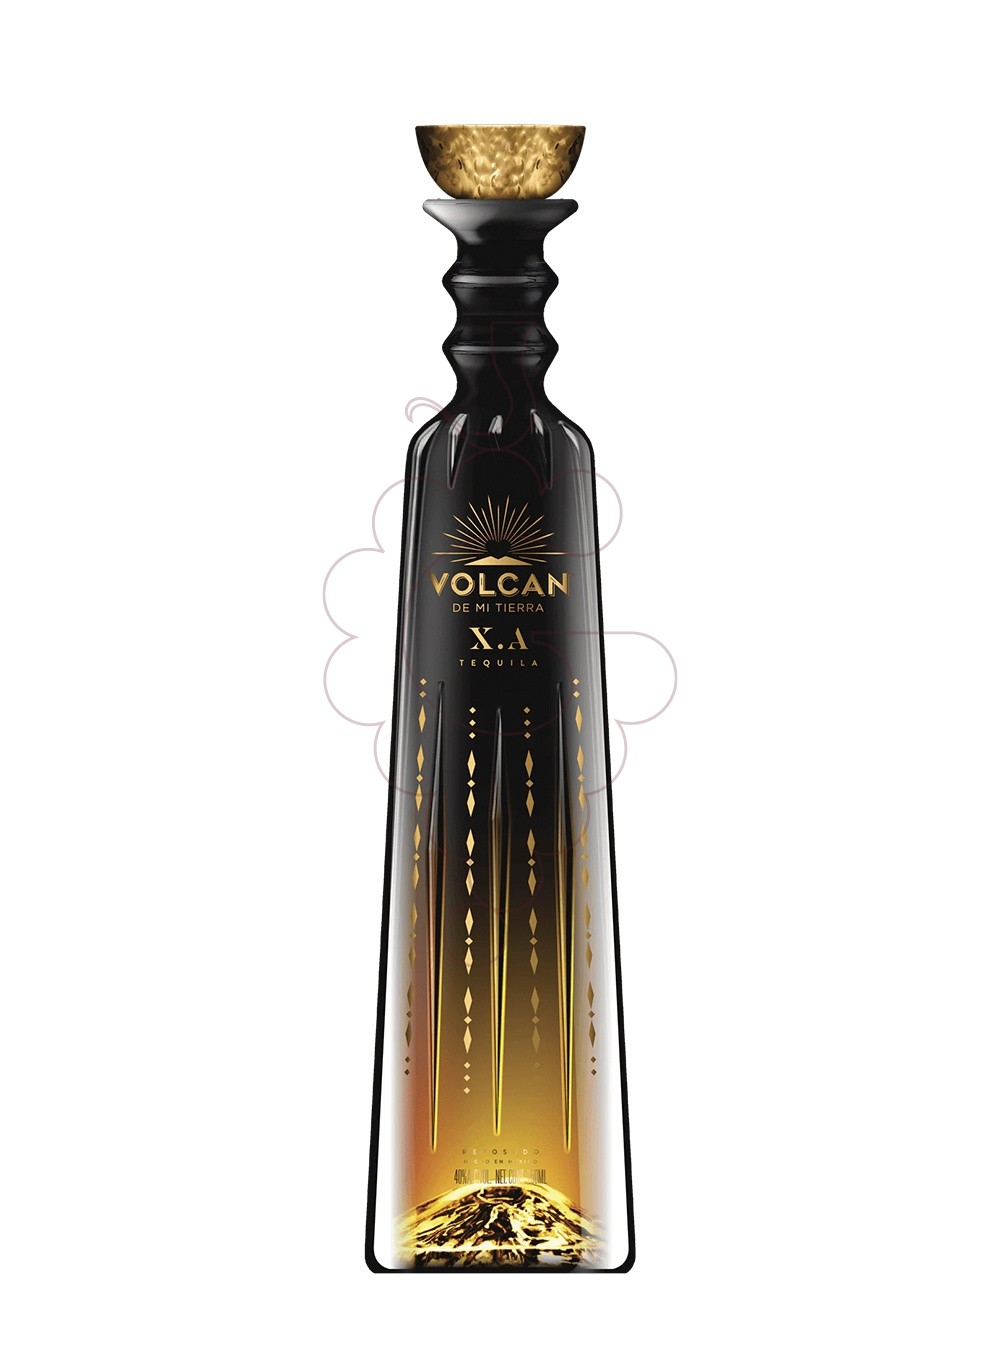 Foto Tequila Tequila volcan x.a. 70 cl